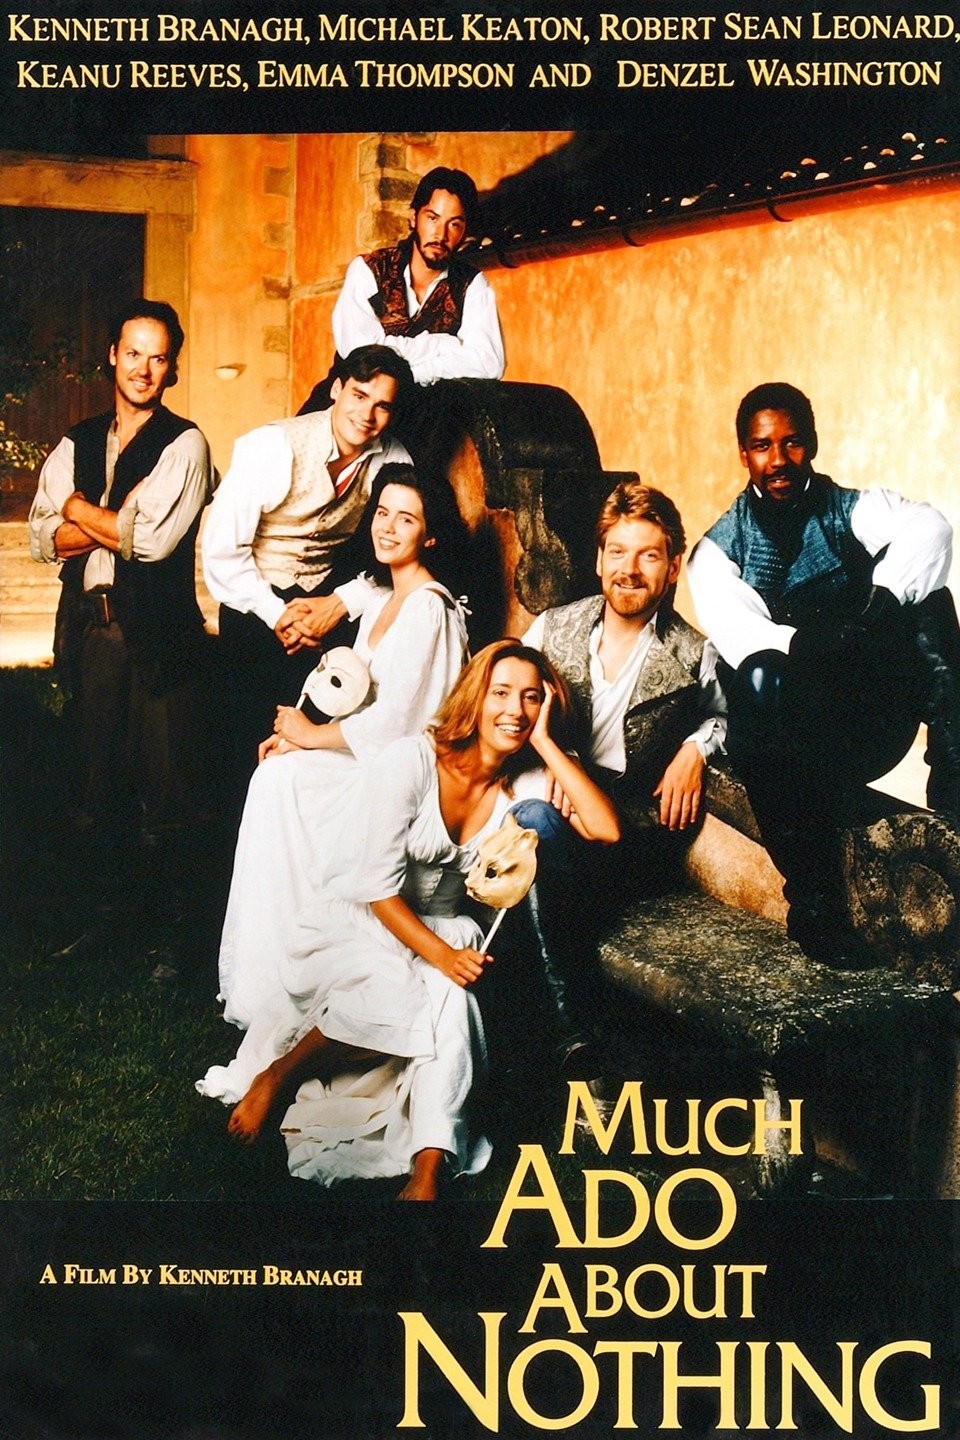 2014 Much Ado About Nothing Poster for Sale by Shakespeare